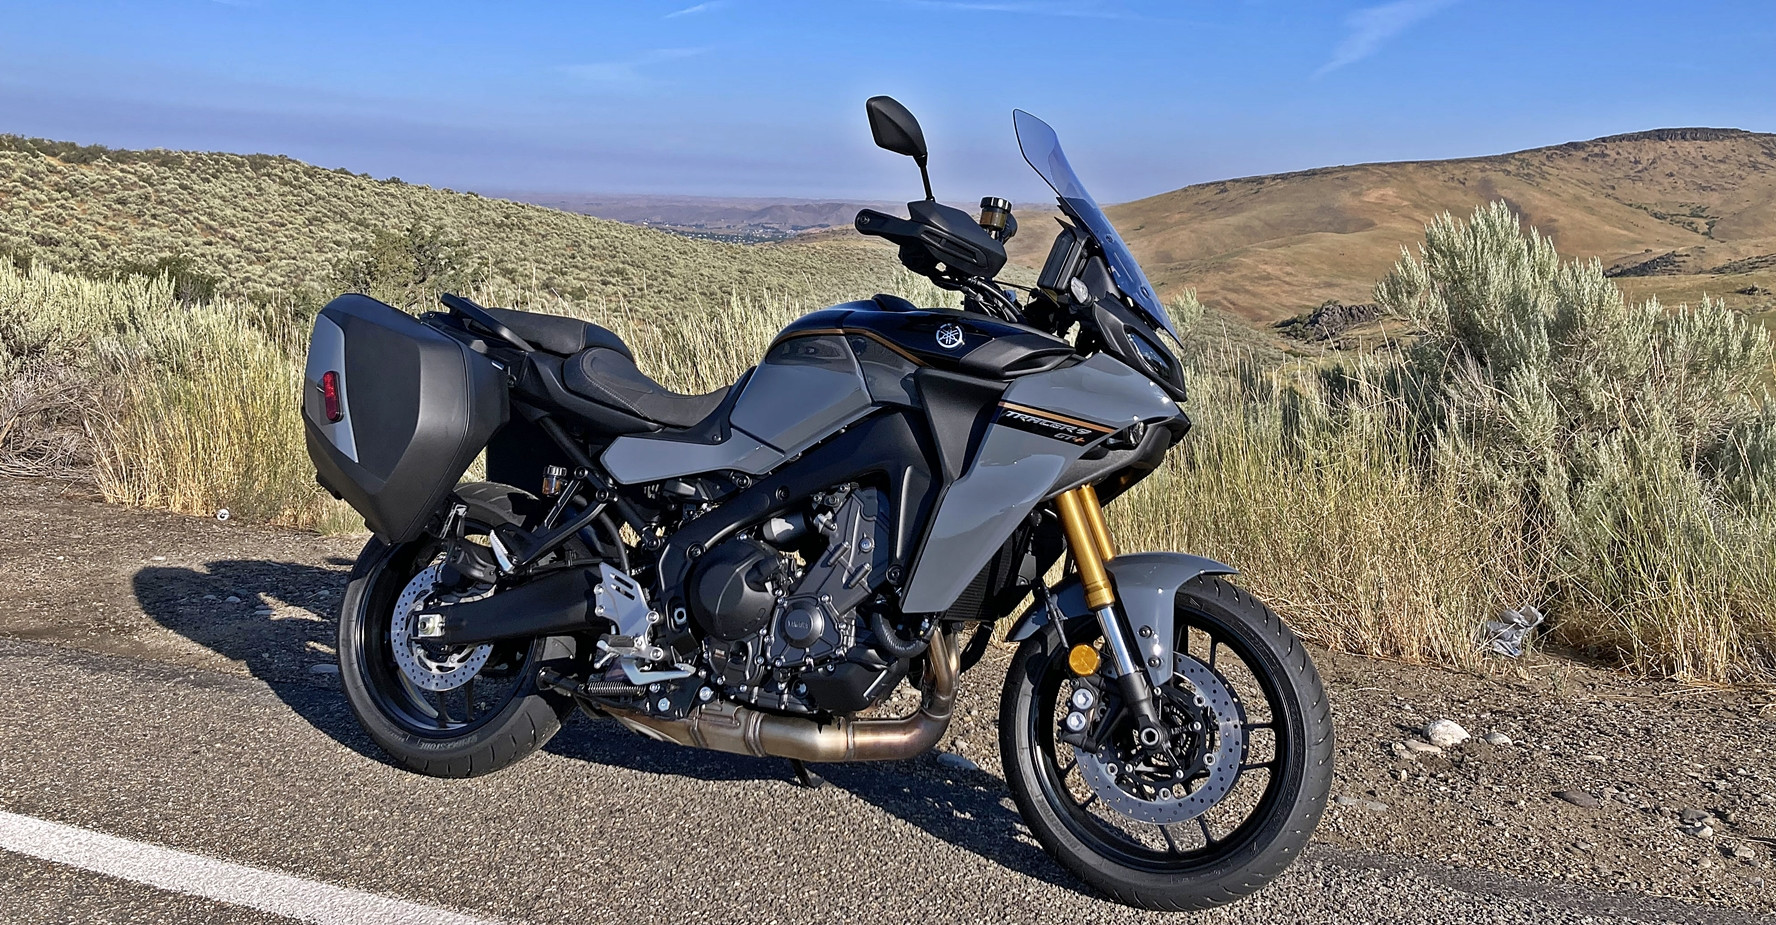 Yamaha's 2024 Tracer 9 GT+, resting on an Idaho back road, is loaded with technology that helps the machine do what it does best - eat miles on the open road and perform in the twisties. Photo by Michael Gougis.